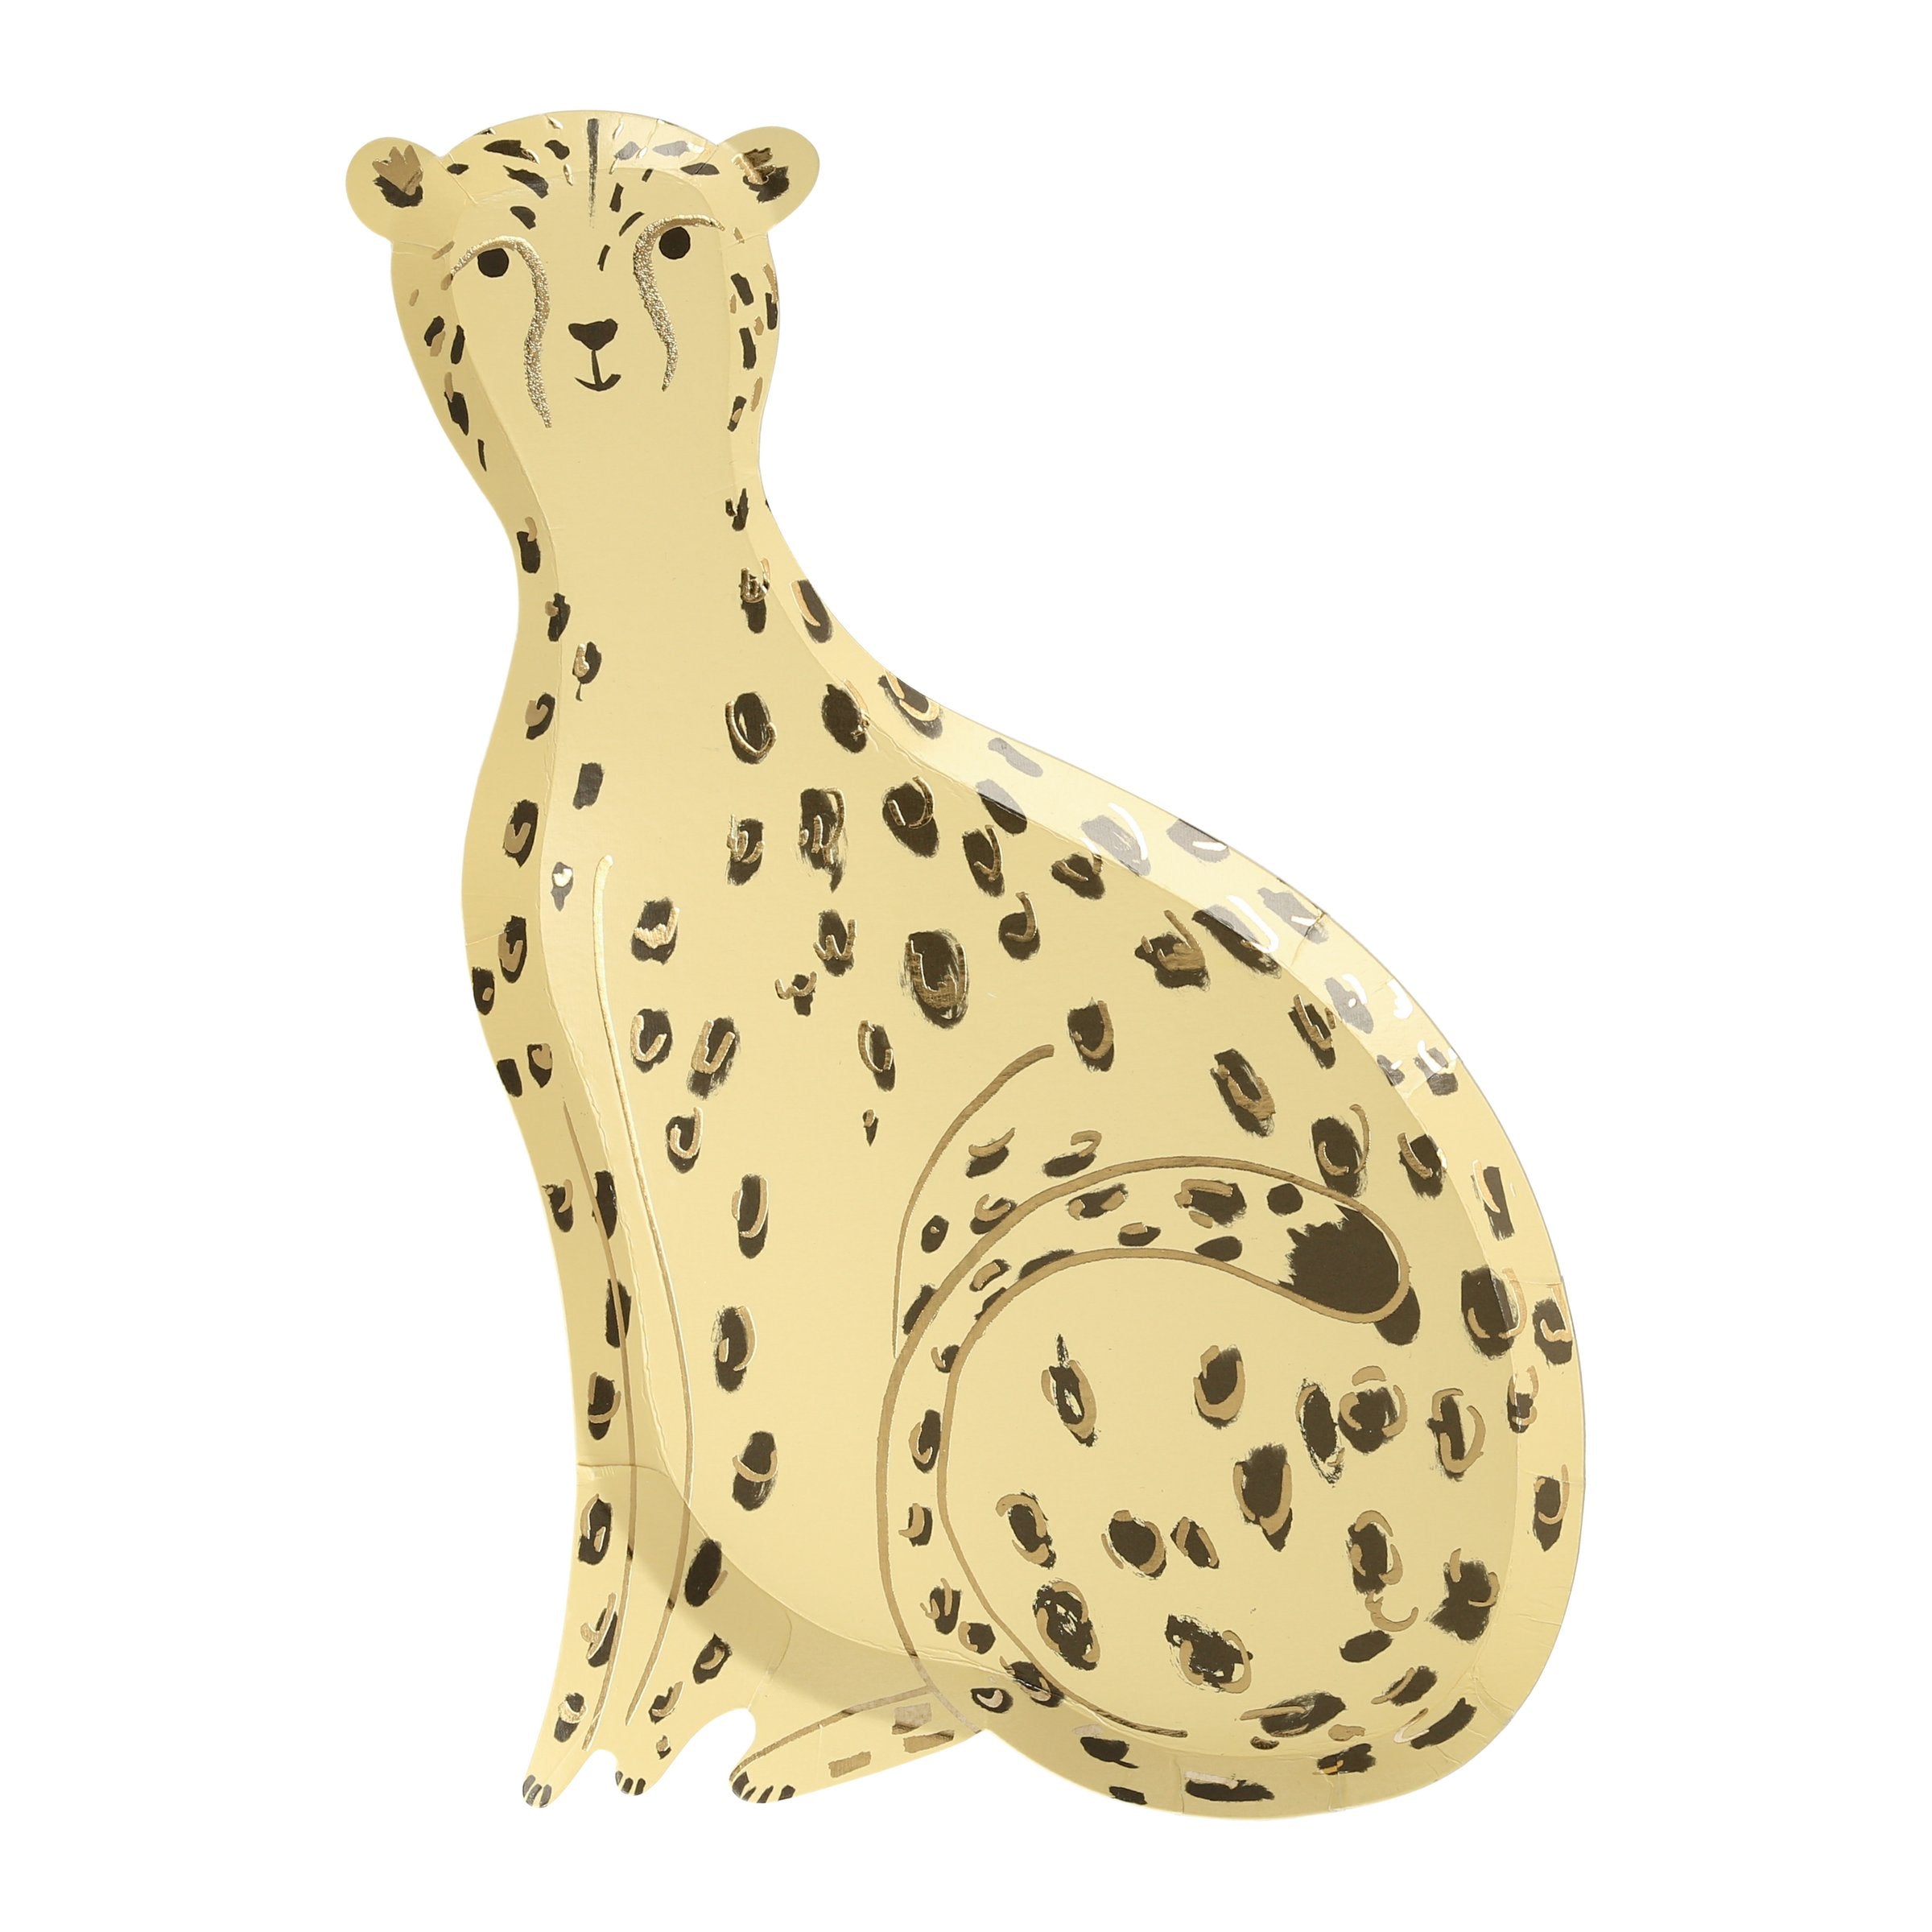 Our cheetah plates feature shiny gold foil detail, perfect for a stylish safari party.